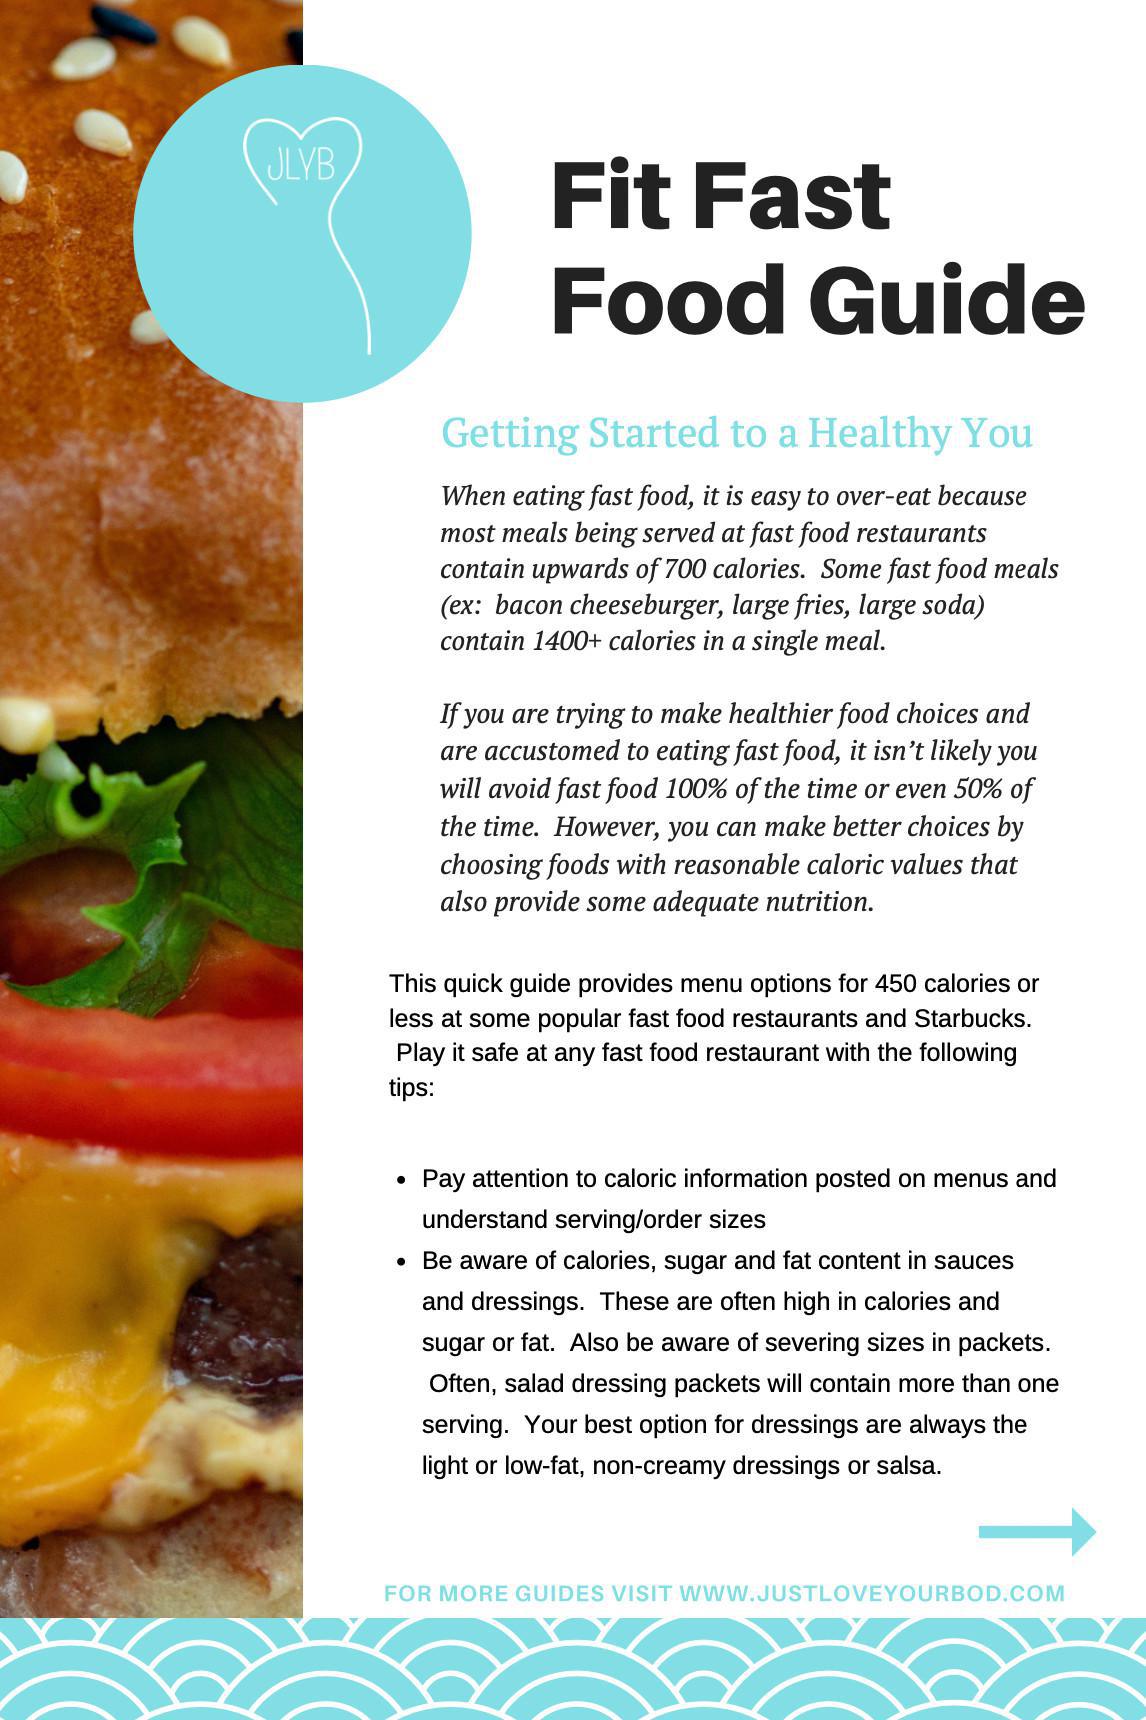 FIT FAST FOOD GUIDE 